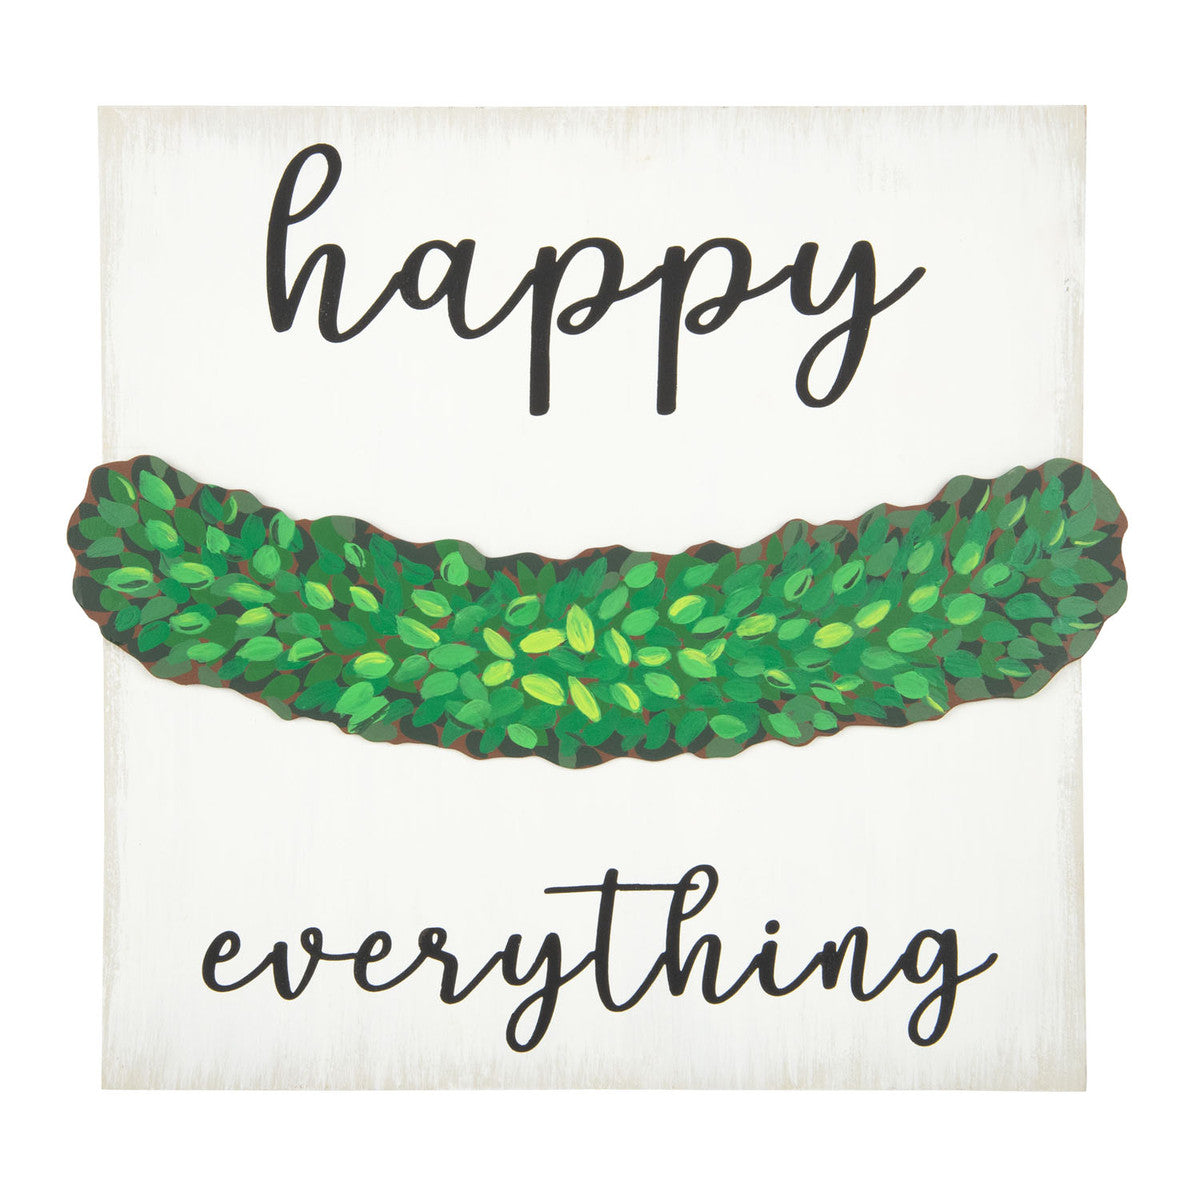 "Happy Everything" Banner and Board